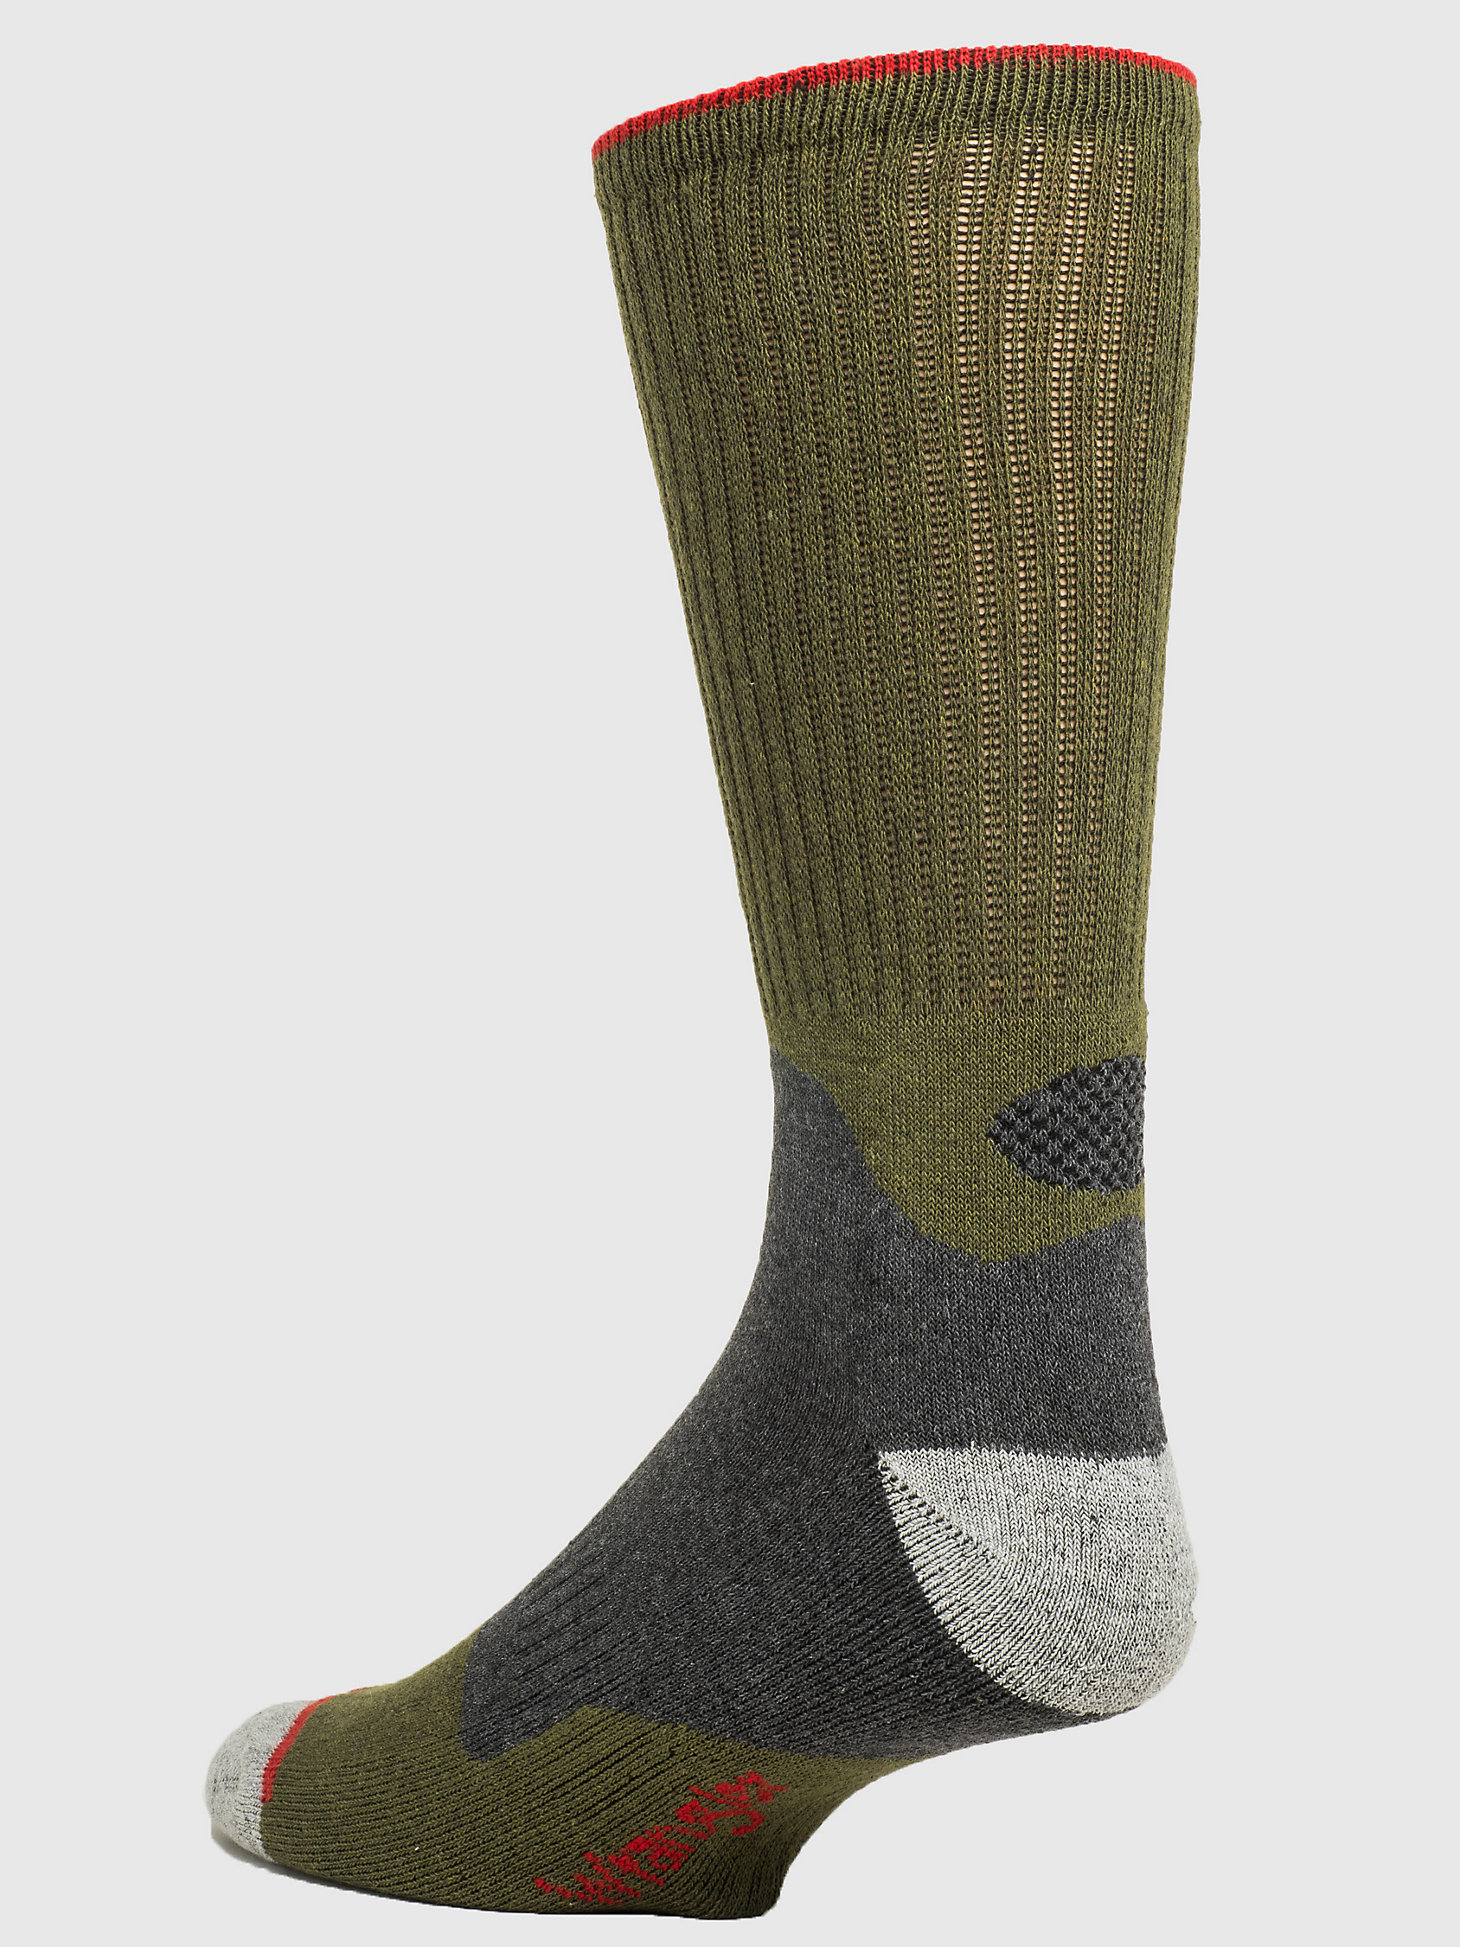 Men's Wrangler Mid-Weight Crew Work Socks (3-Pack) in Army Green alternative view 1